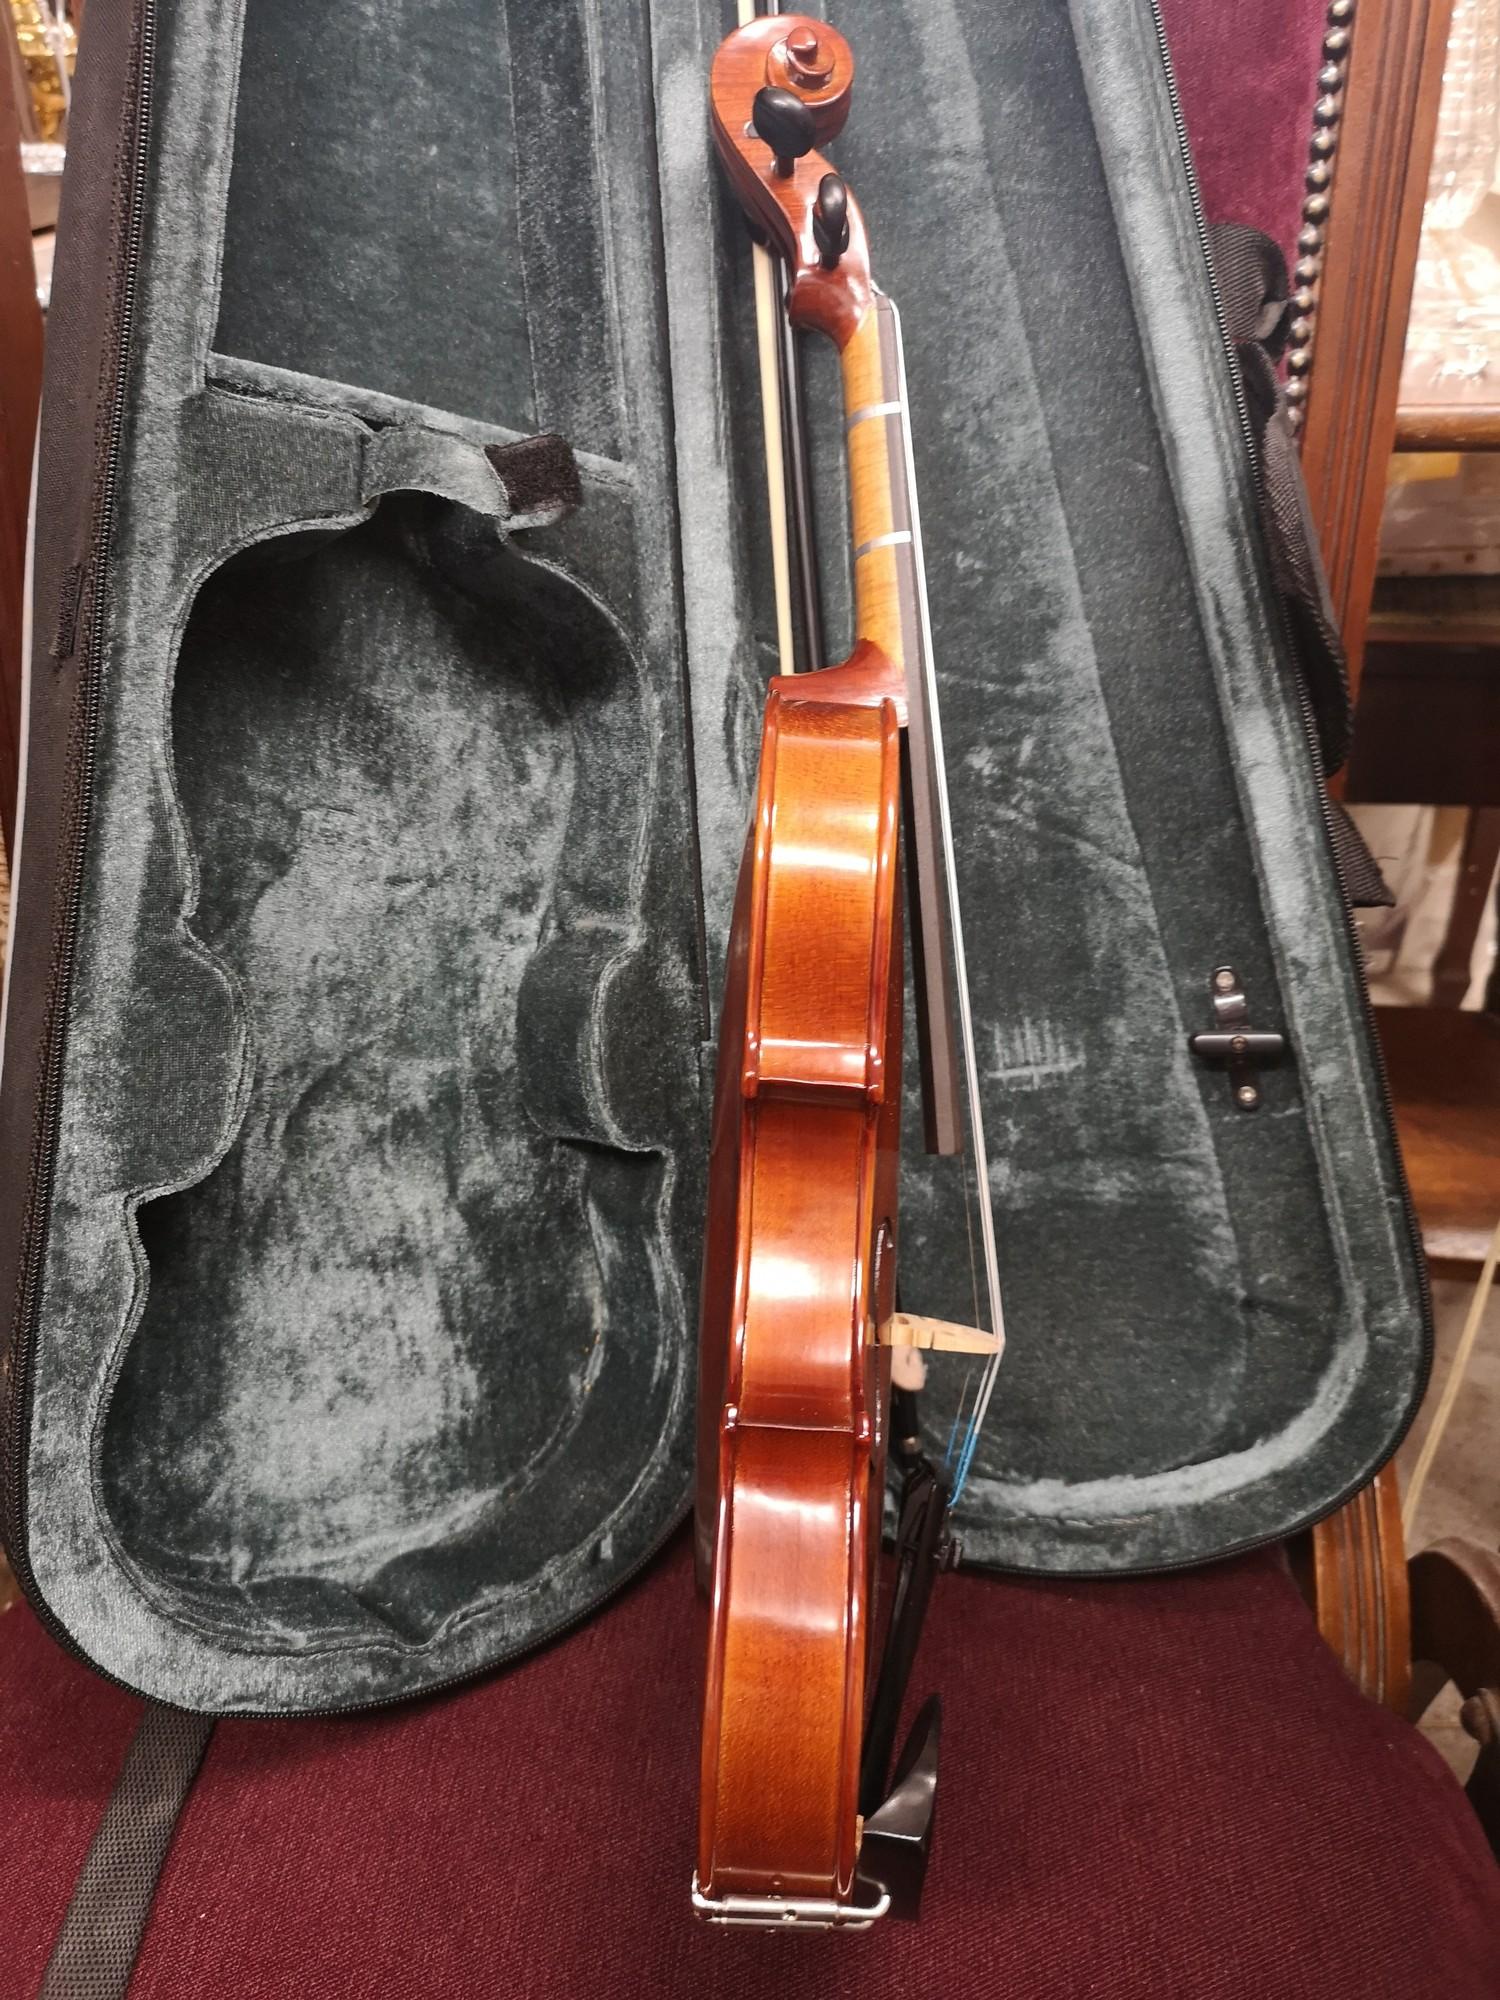 Primavera model number 209 violin with case and bow. - Image 3 of 5